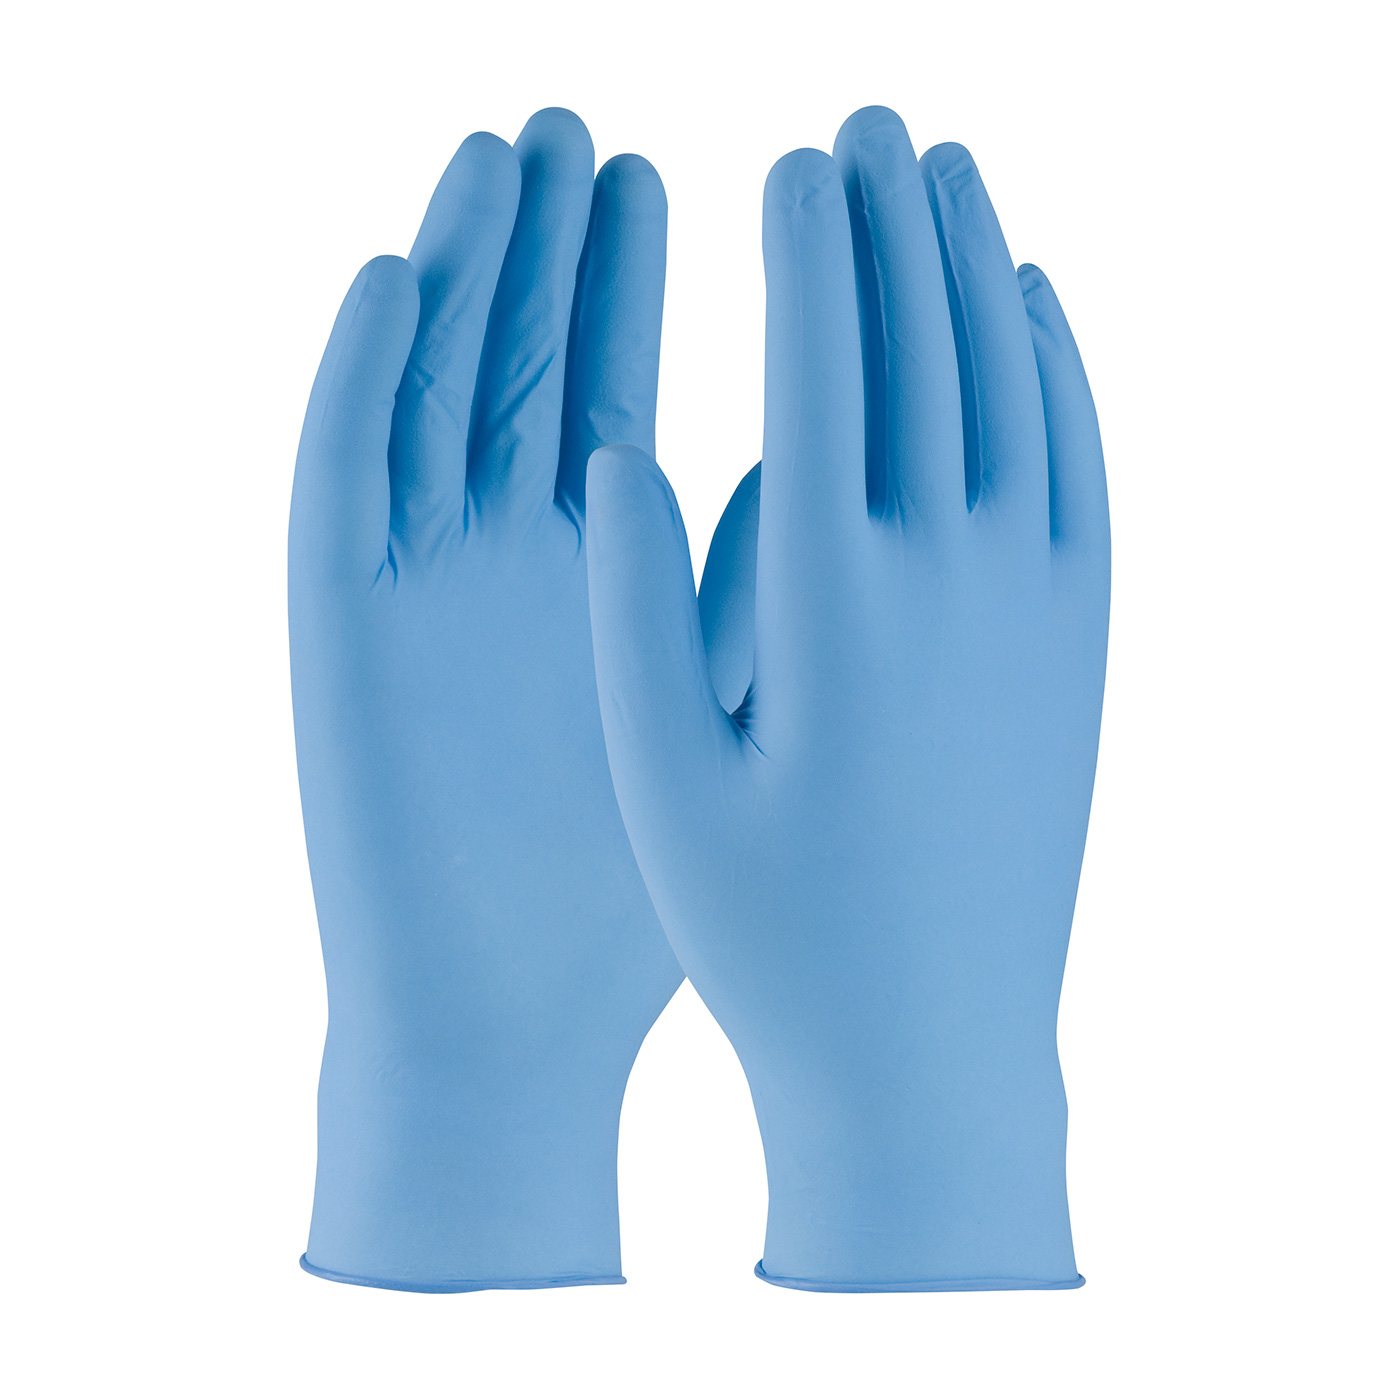 #63-332 PIP® 5-Mil Ambi-dex® Turbo Industrial Disposable Powdered Nitrile Gloves 